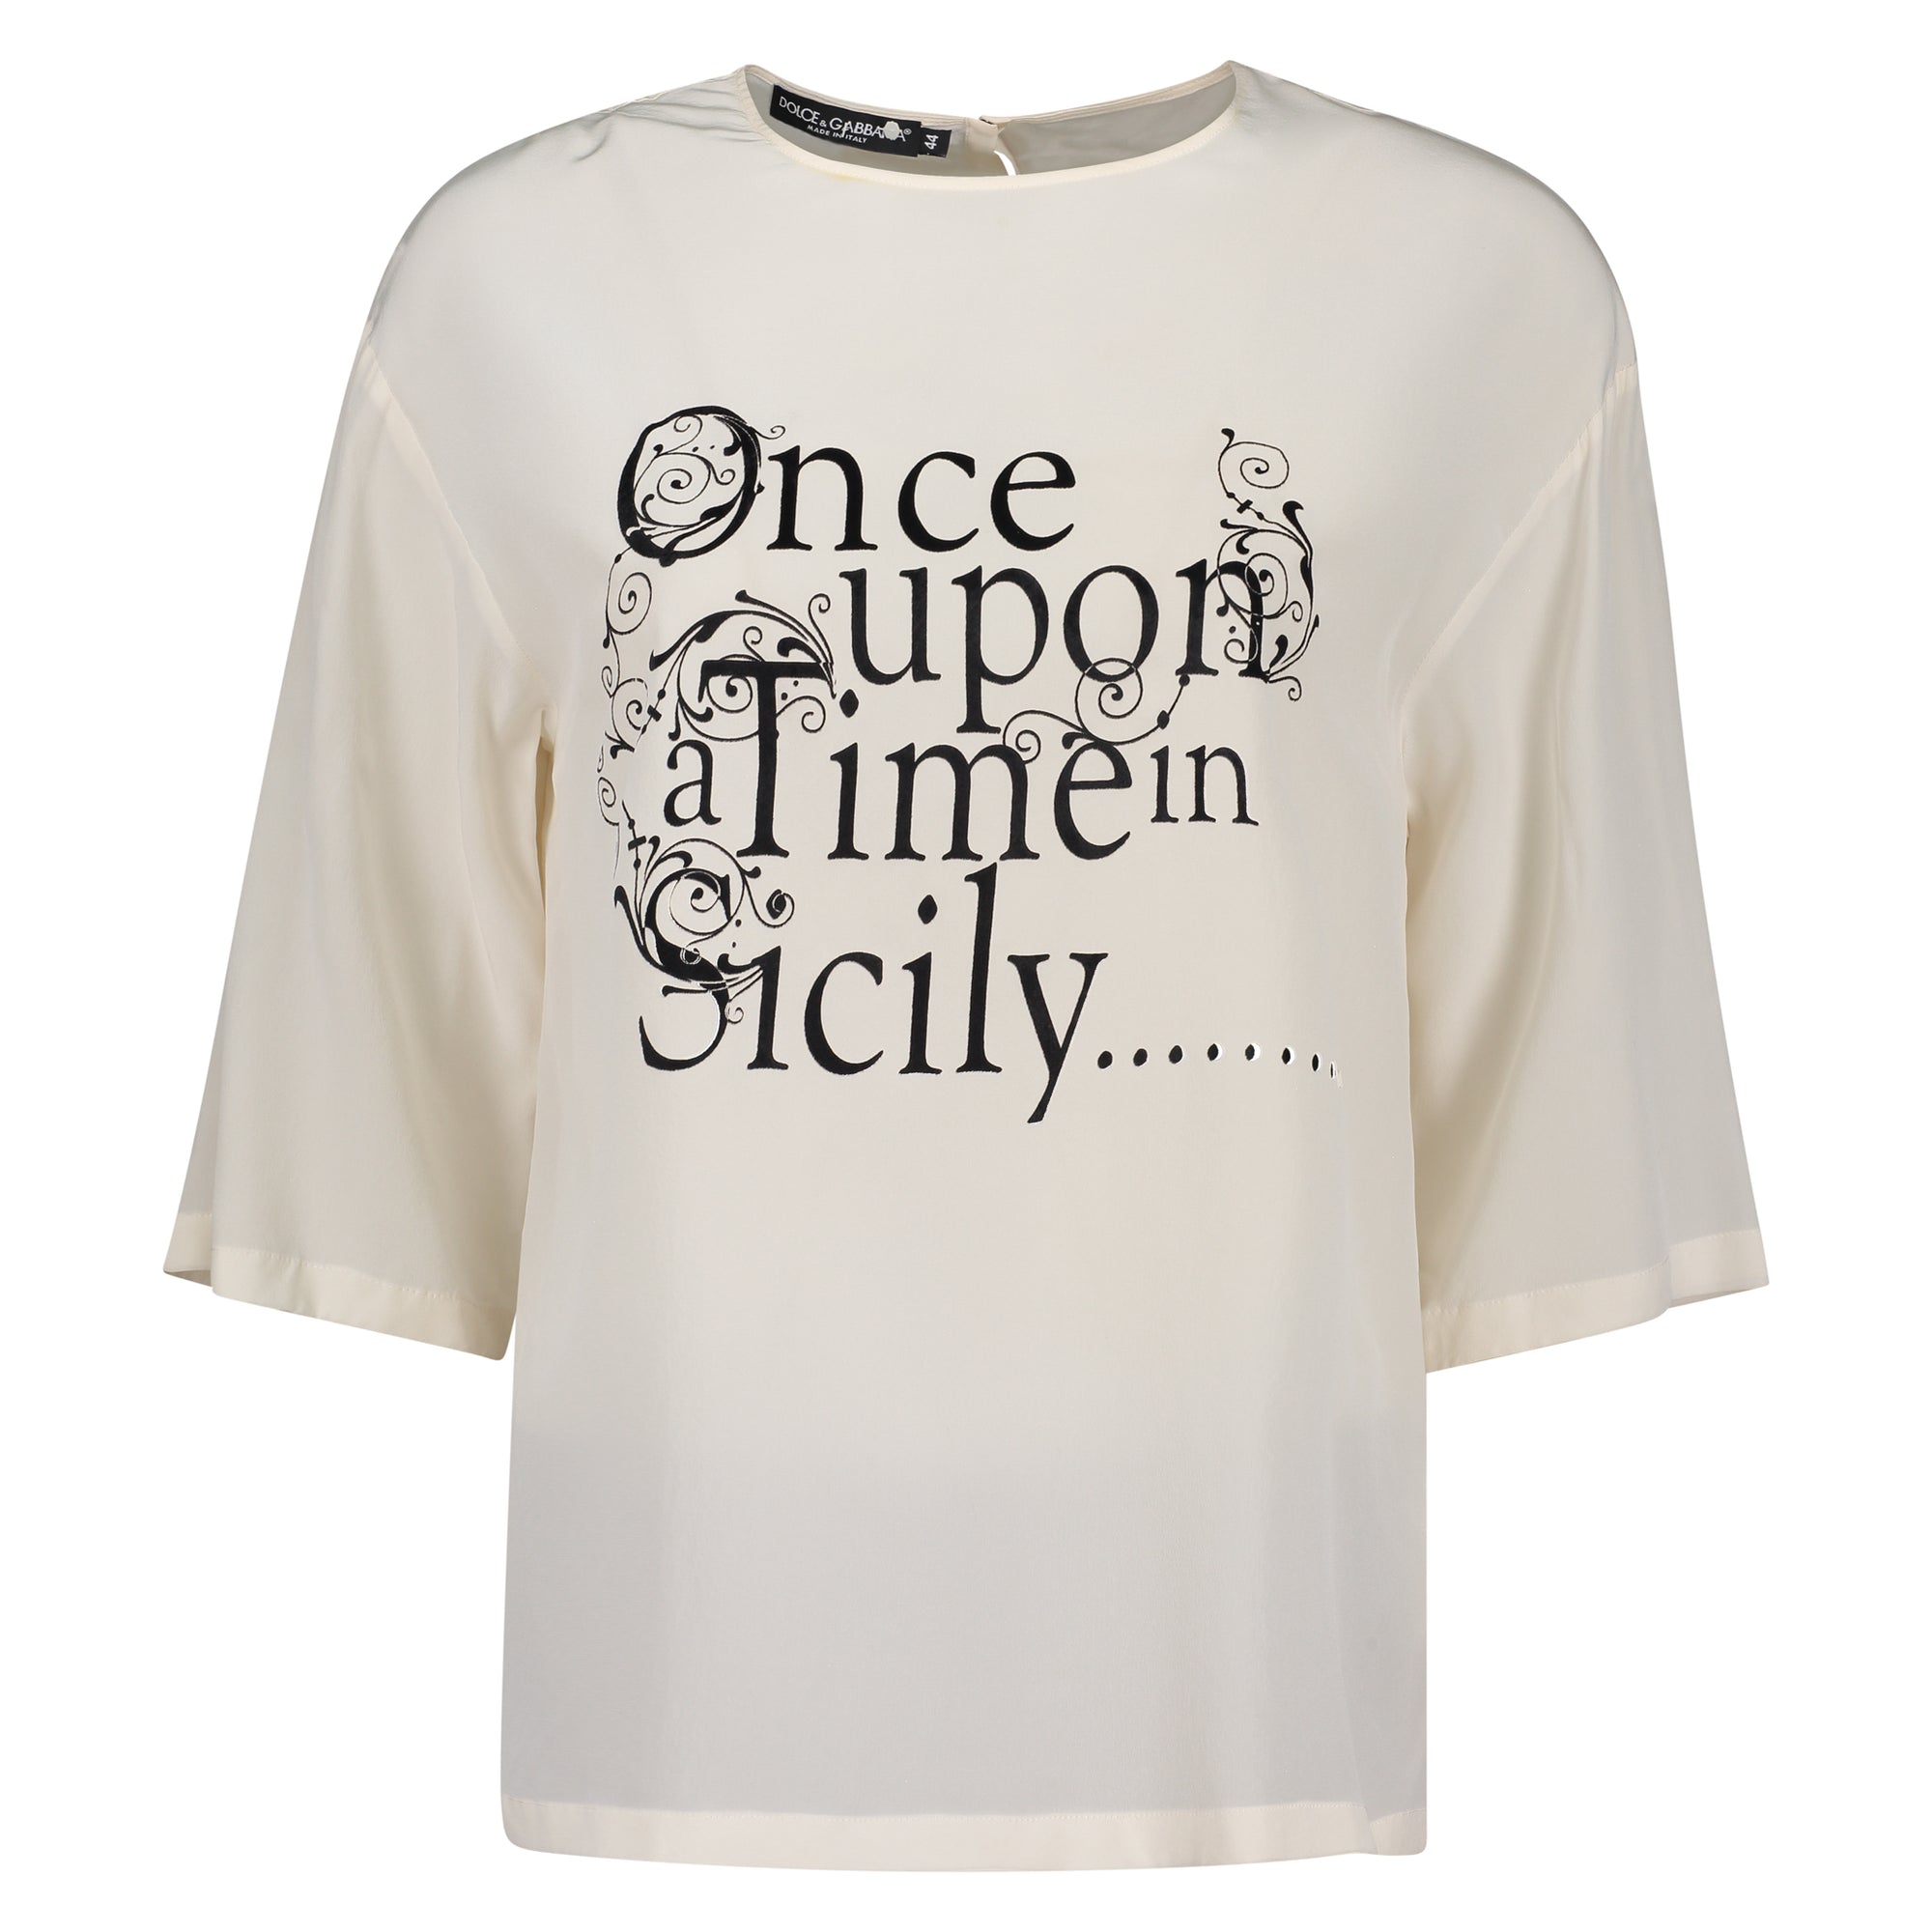 Dolce & Gabbana ''Once upon a time...' T-shirt White silk